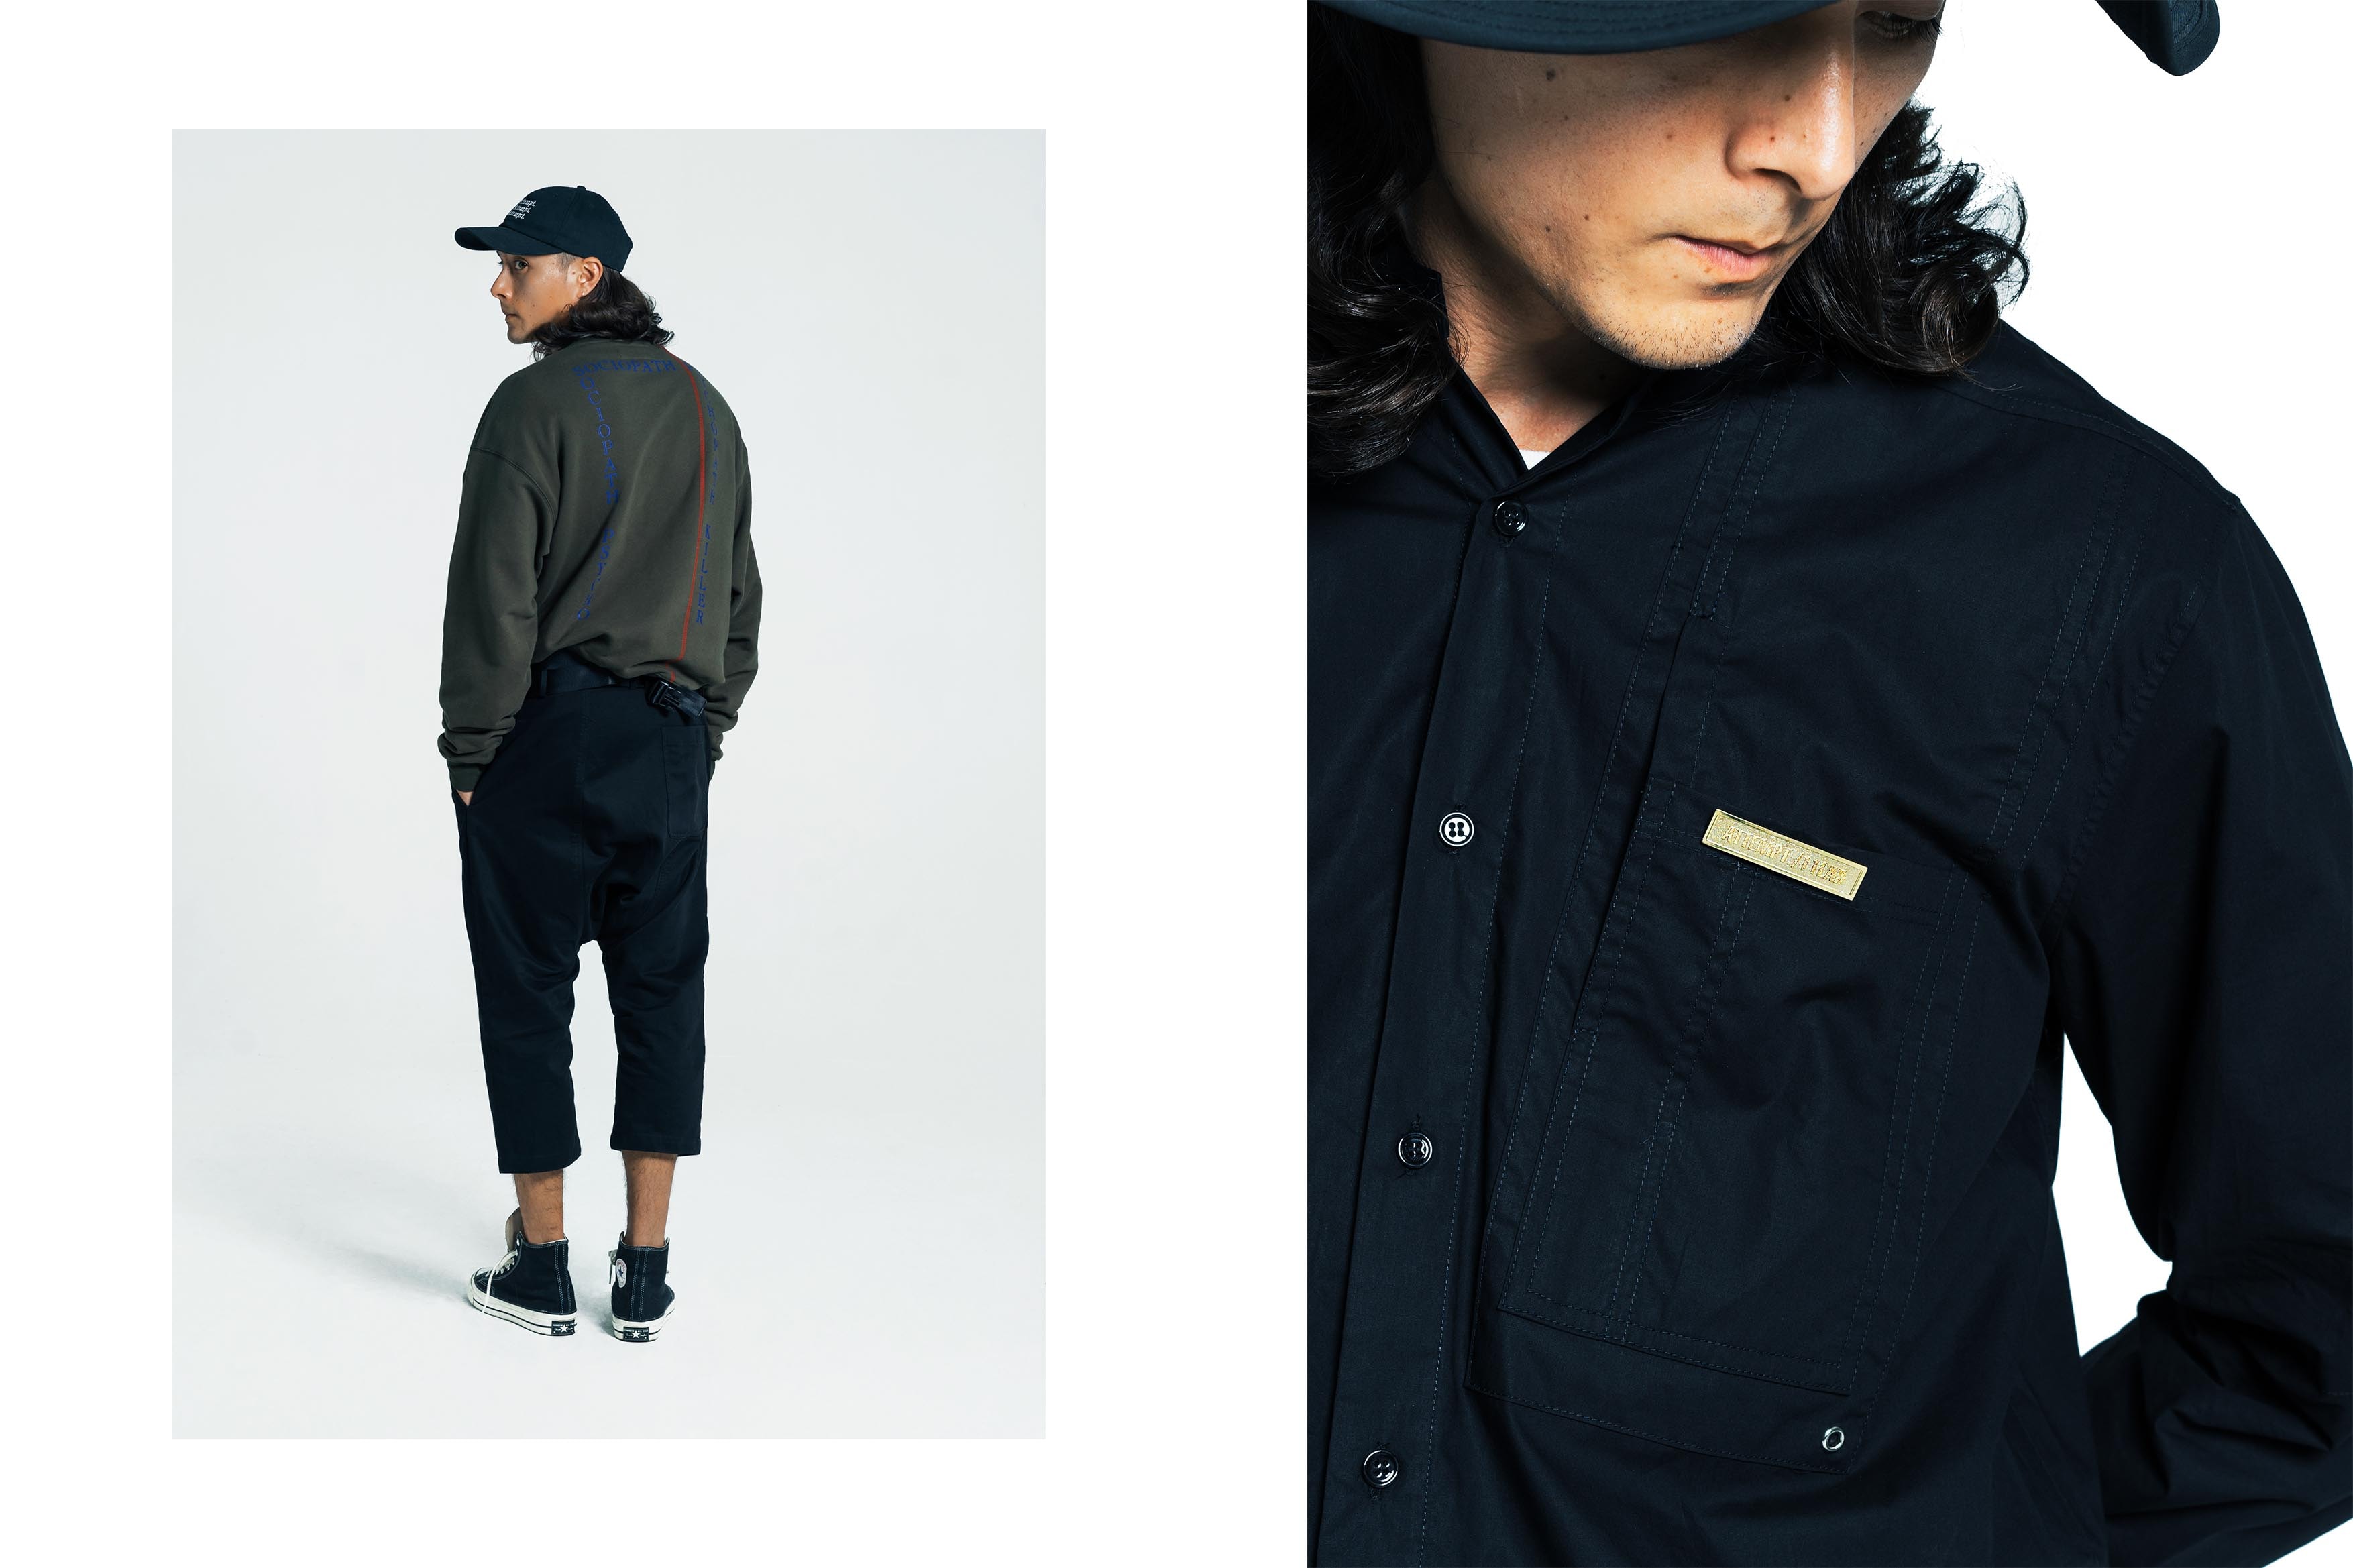 ATTEMPET 2016 Fall/Winter "The Man In A Case" Lookbook